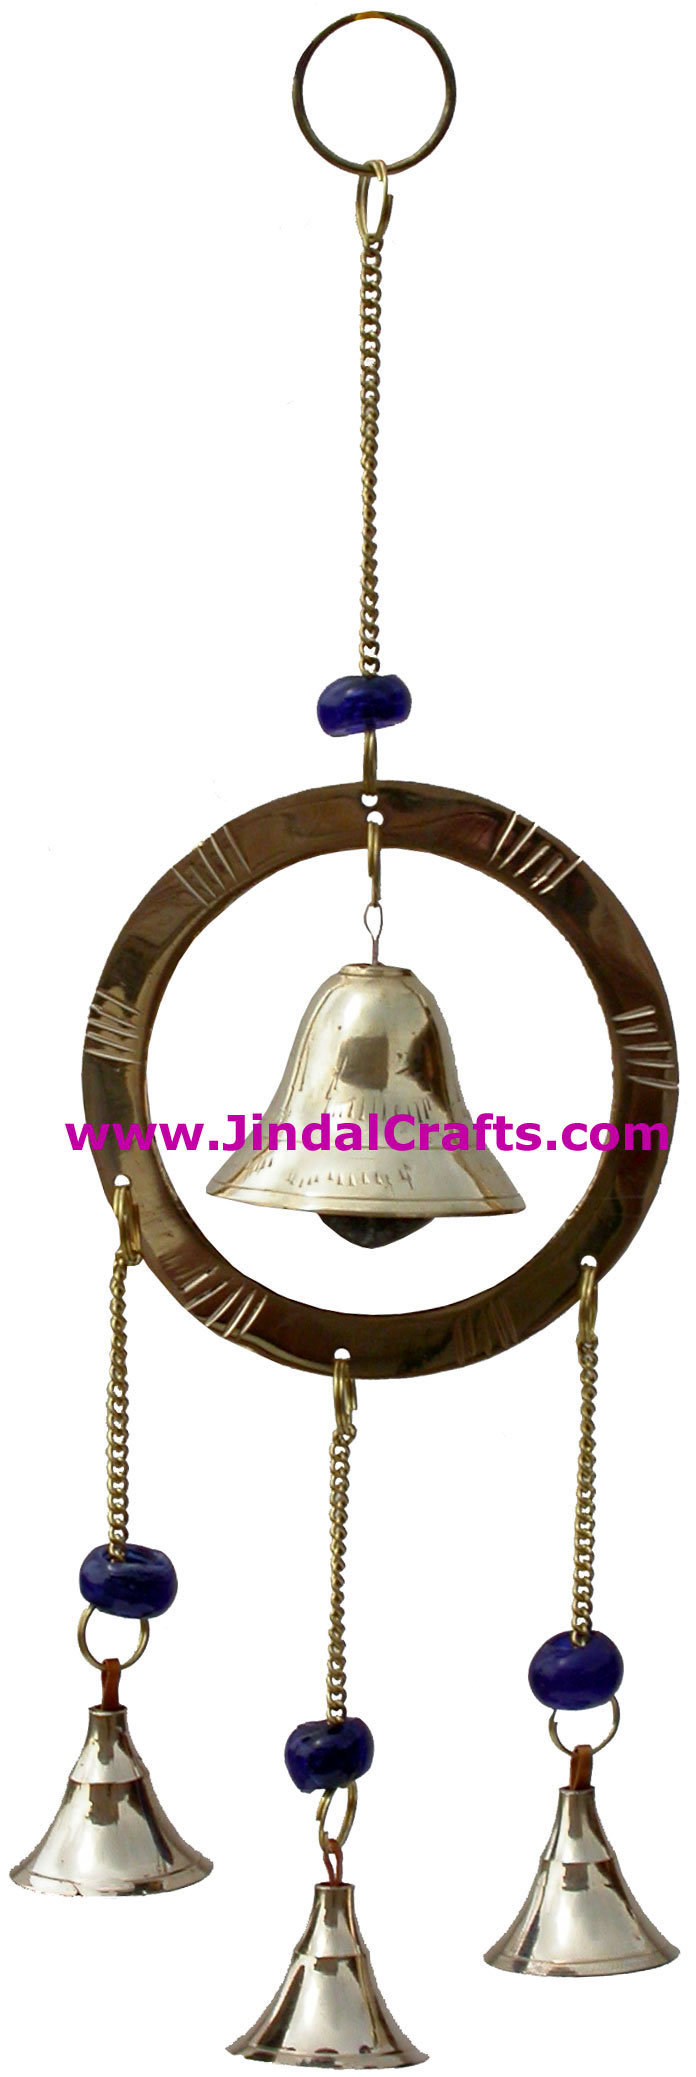 Wind Chime Bell - Brass Made Home Decoration Indian Art